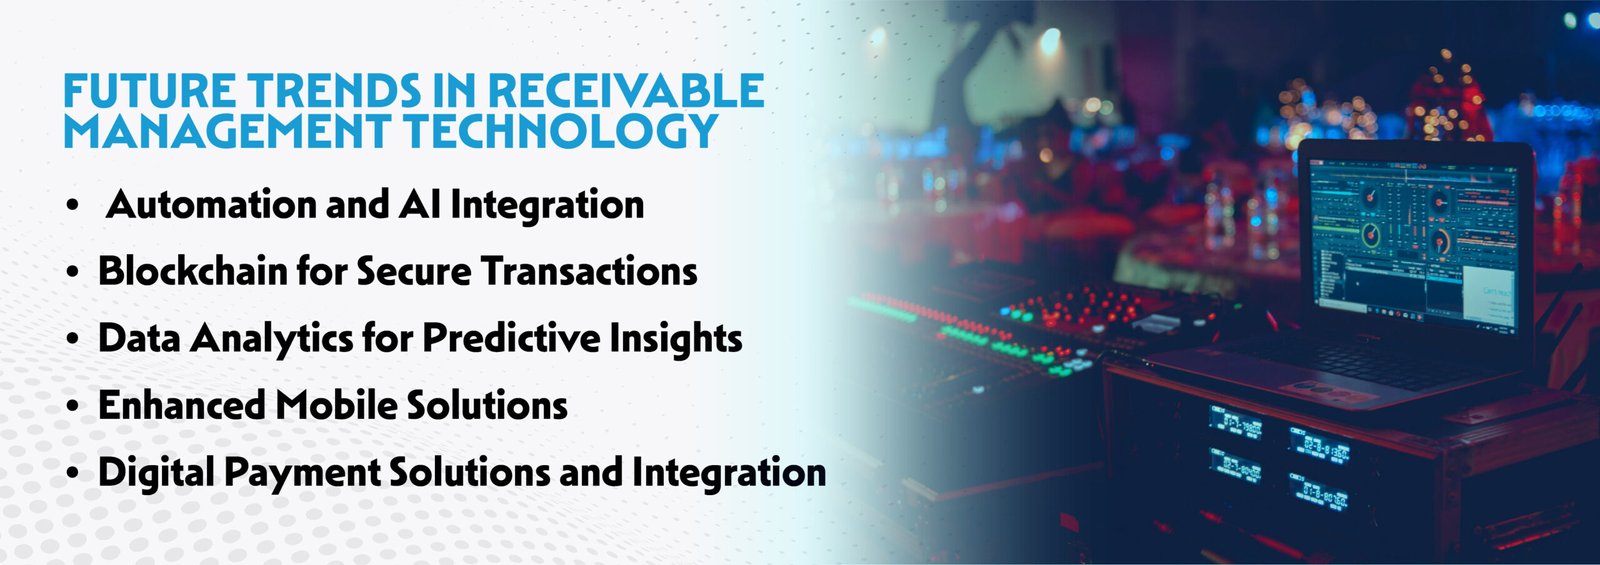 Future Trends in Receivable Management Technology